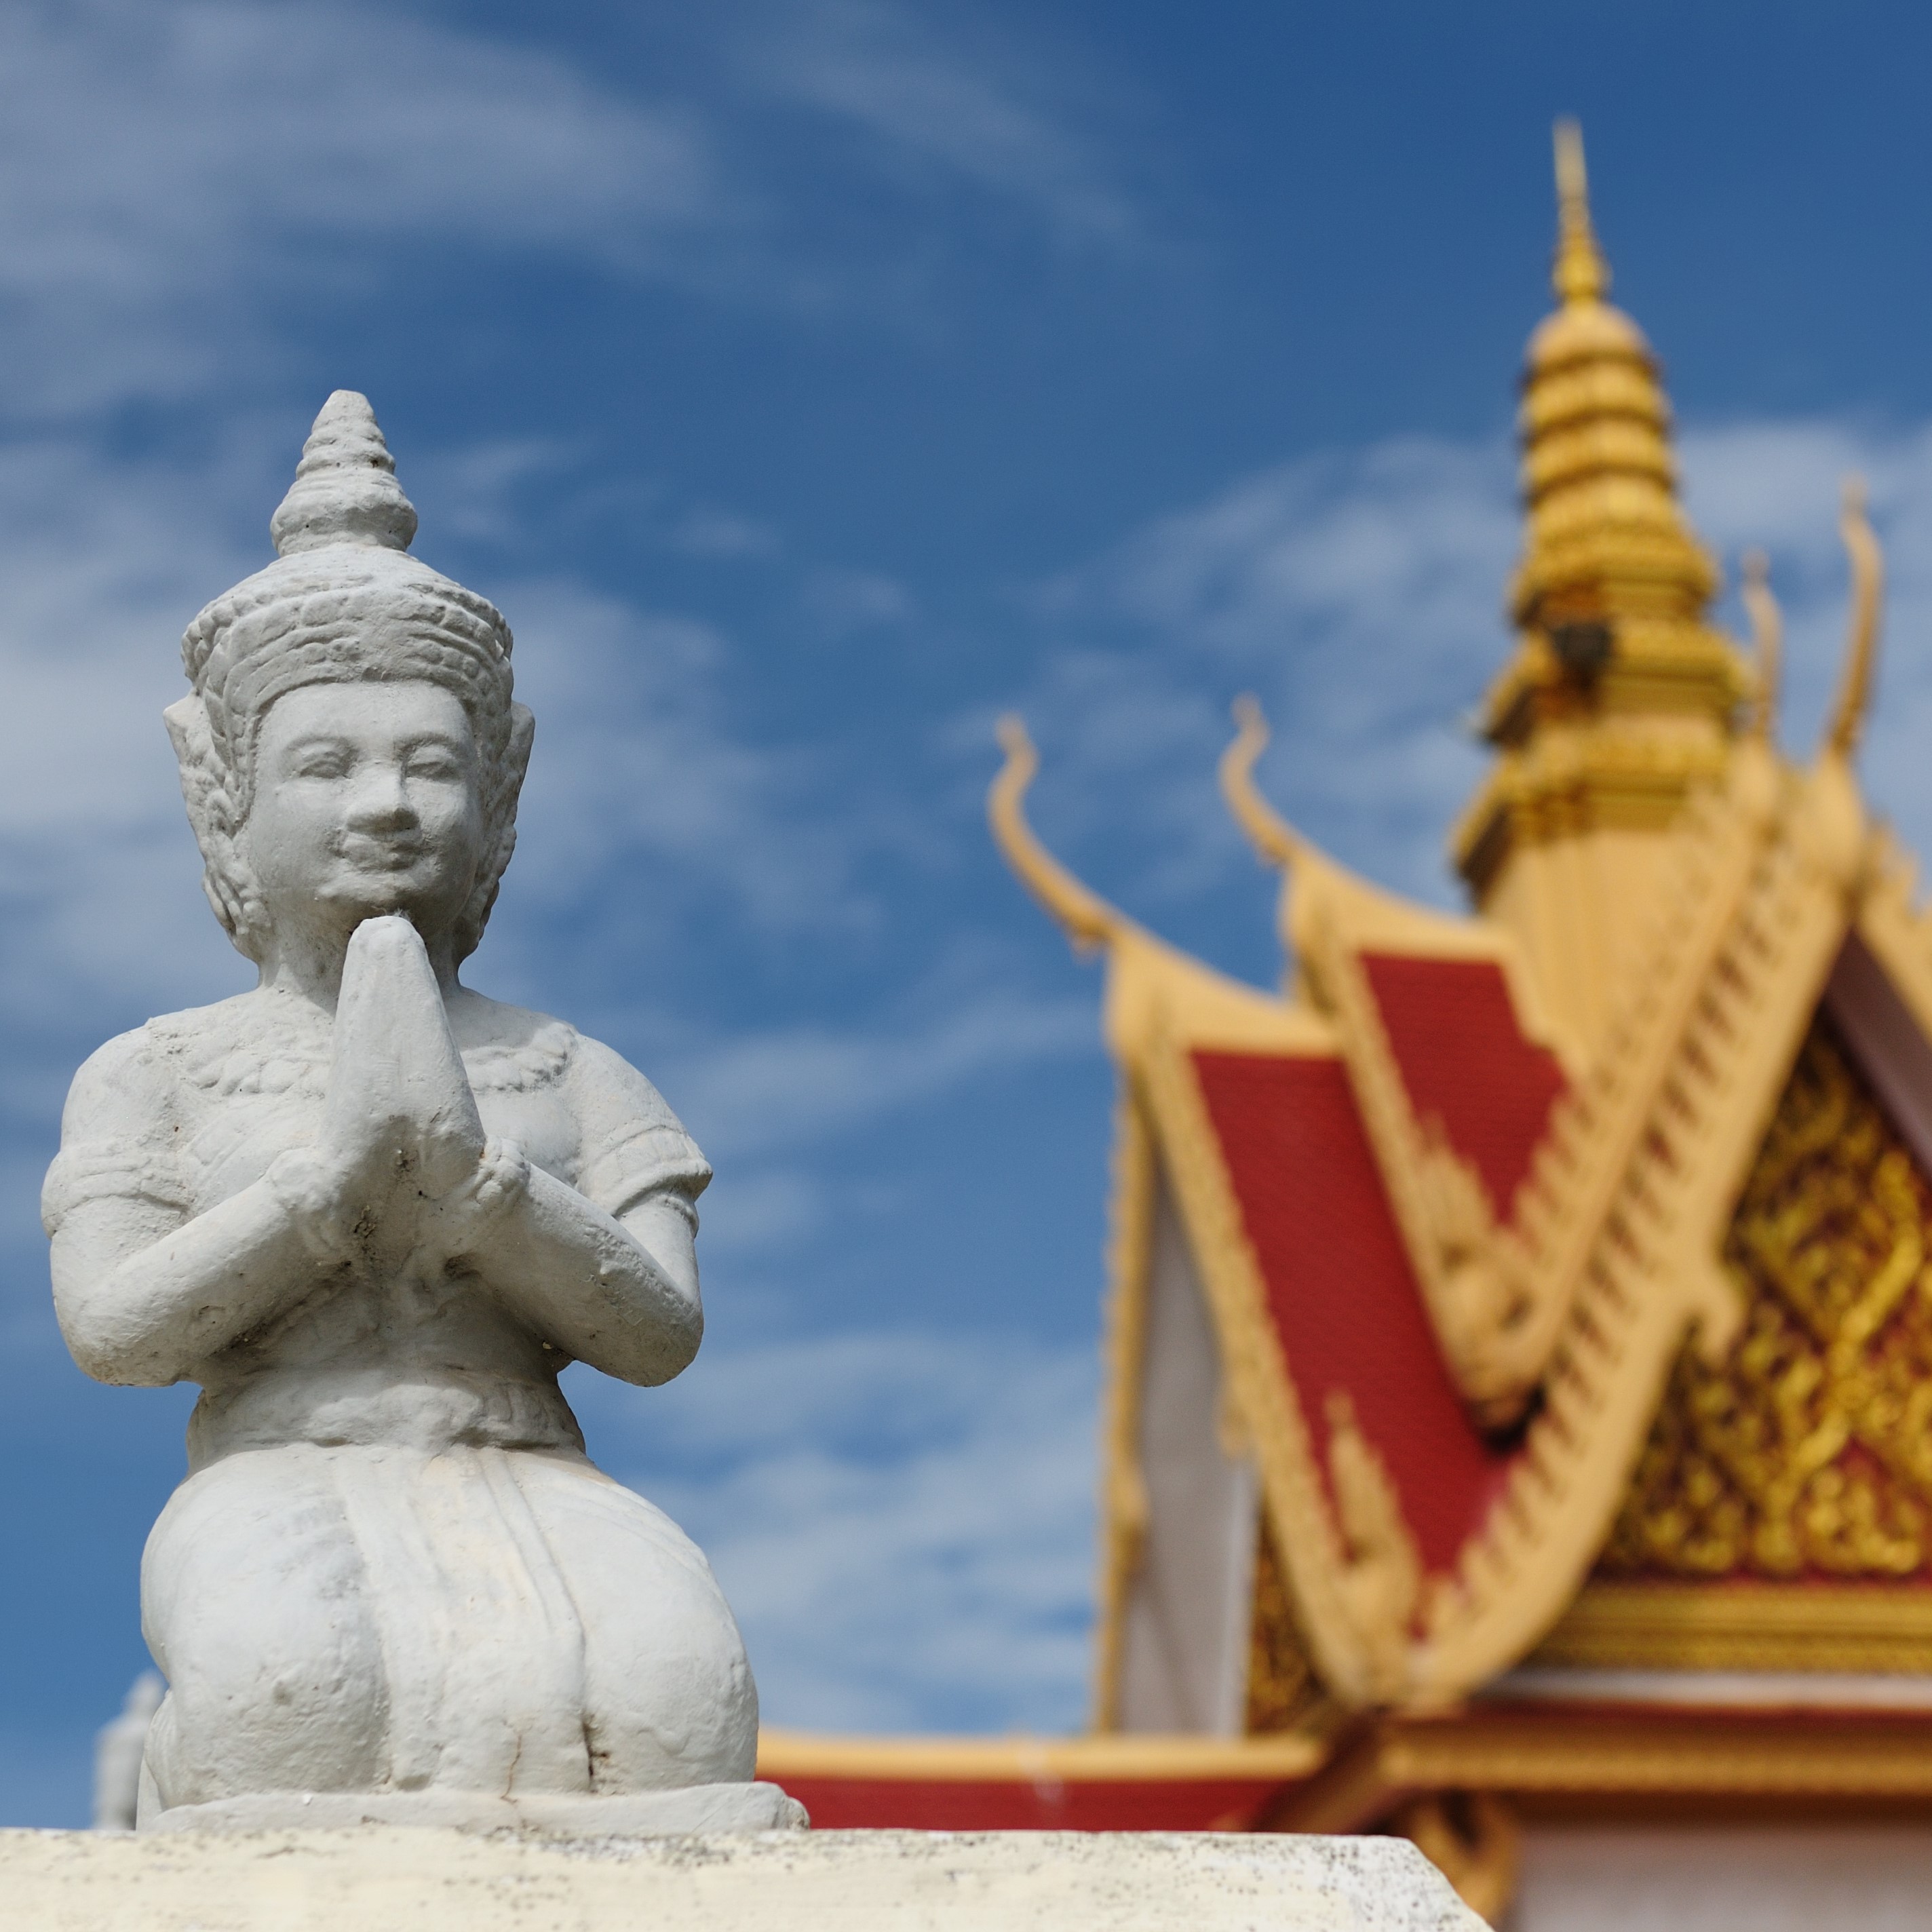 48 Hours in Phnom Penh: Tuk Tuks, Boats and Automobiles